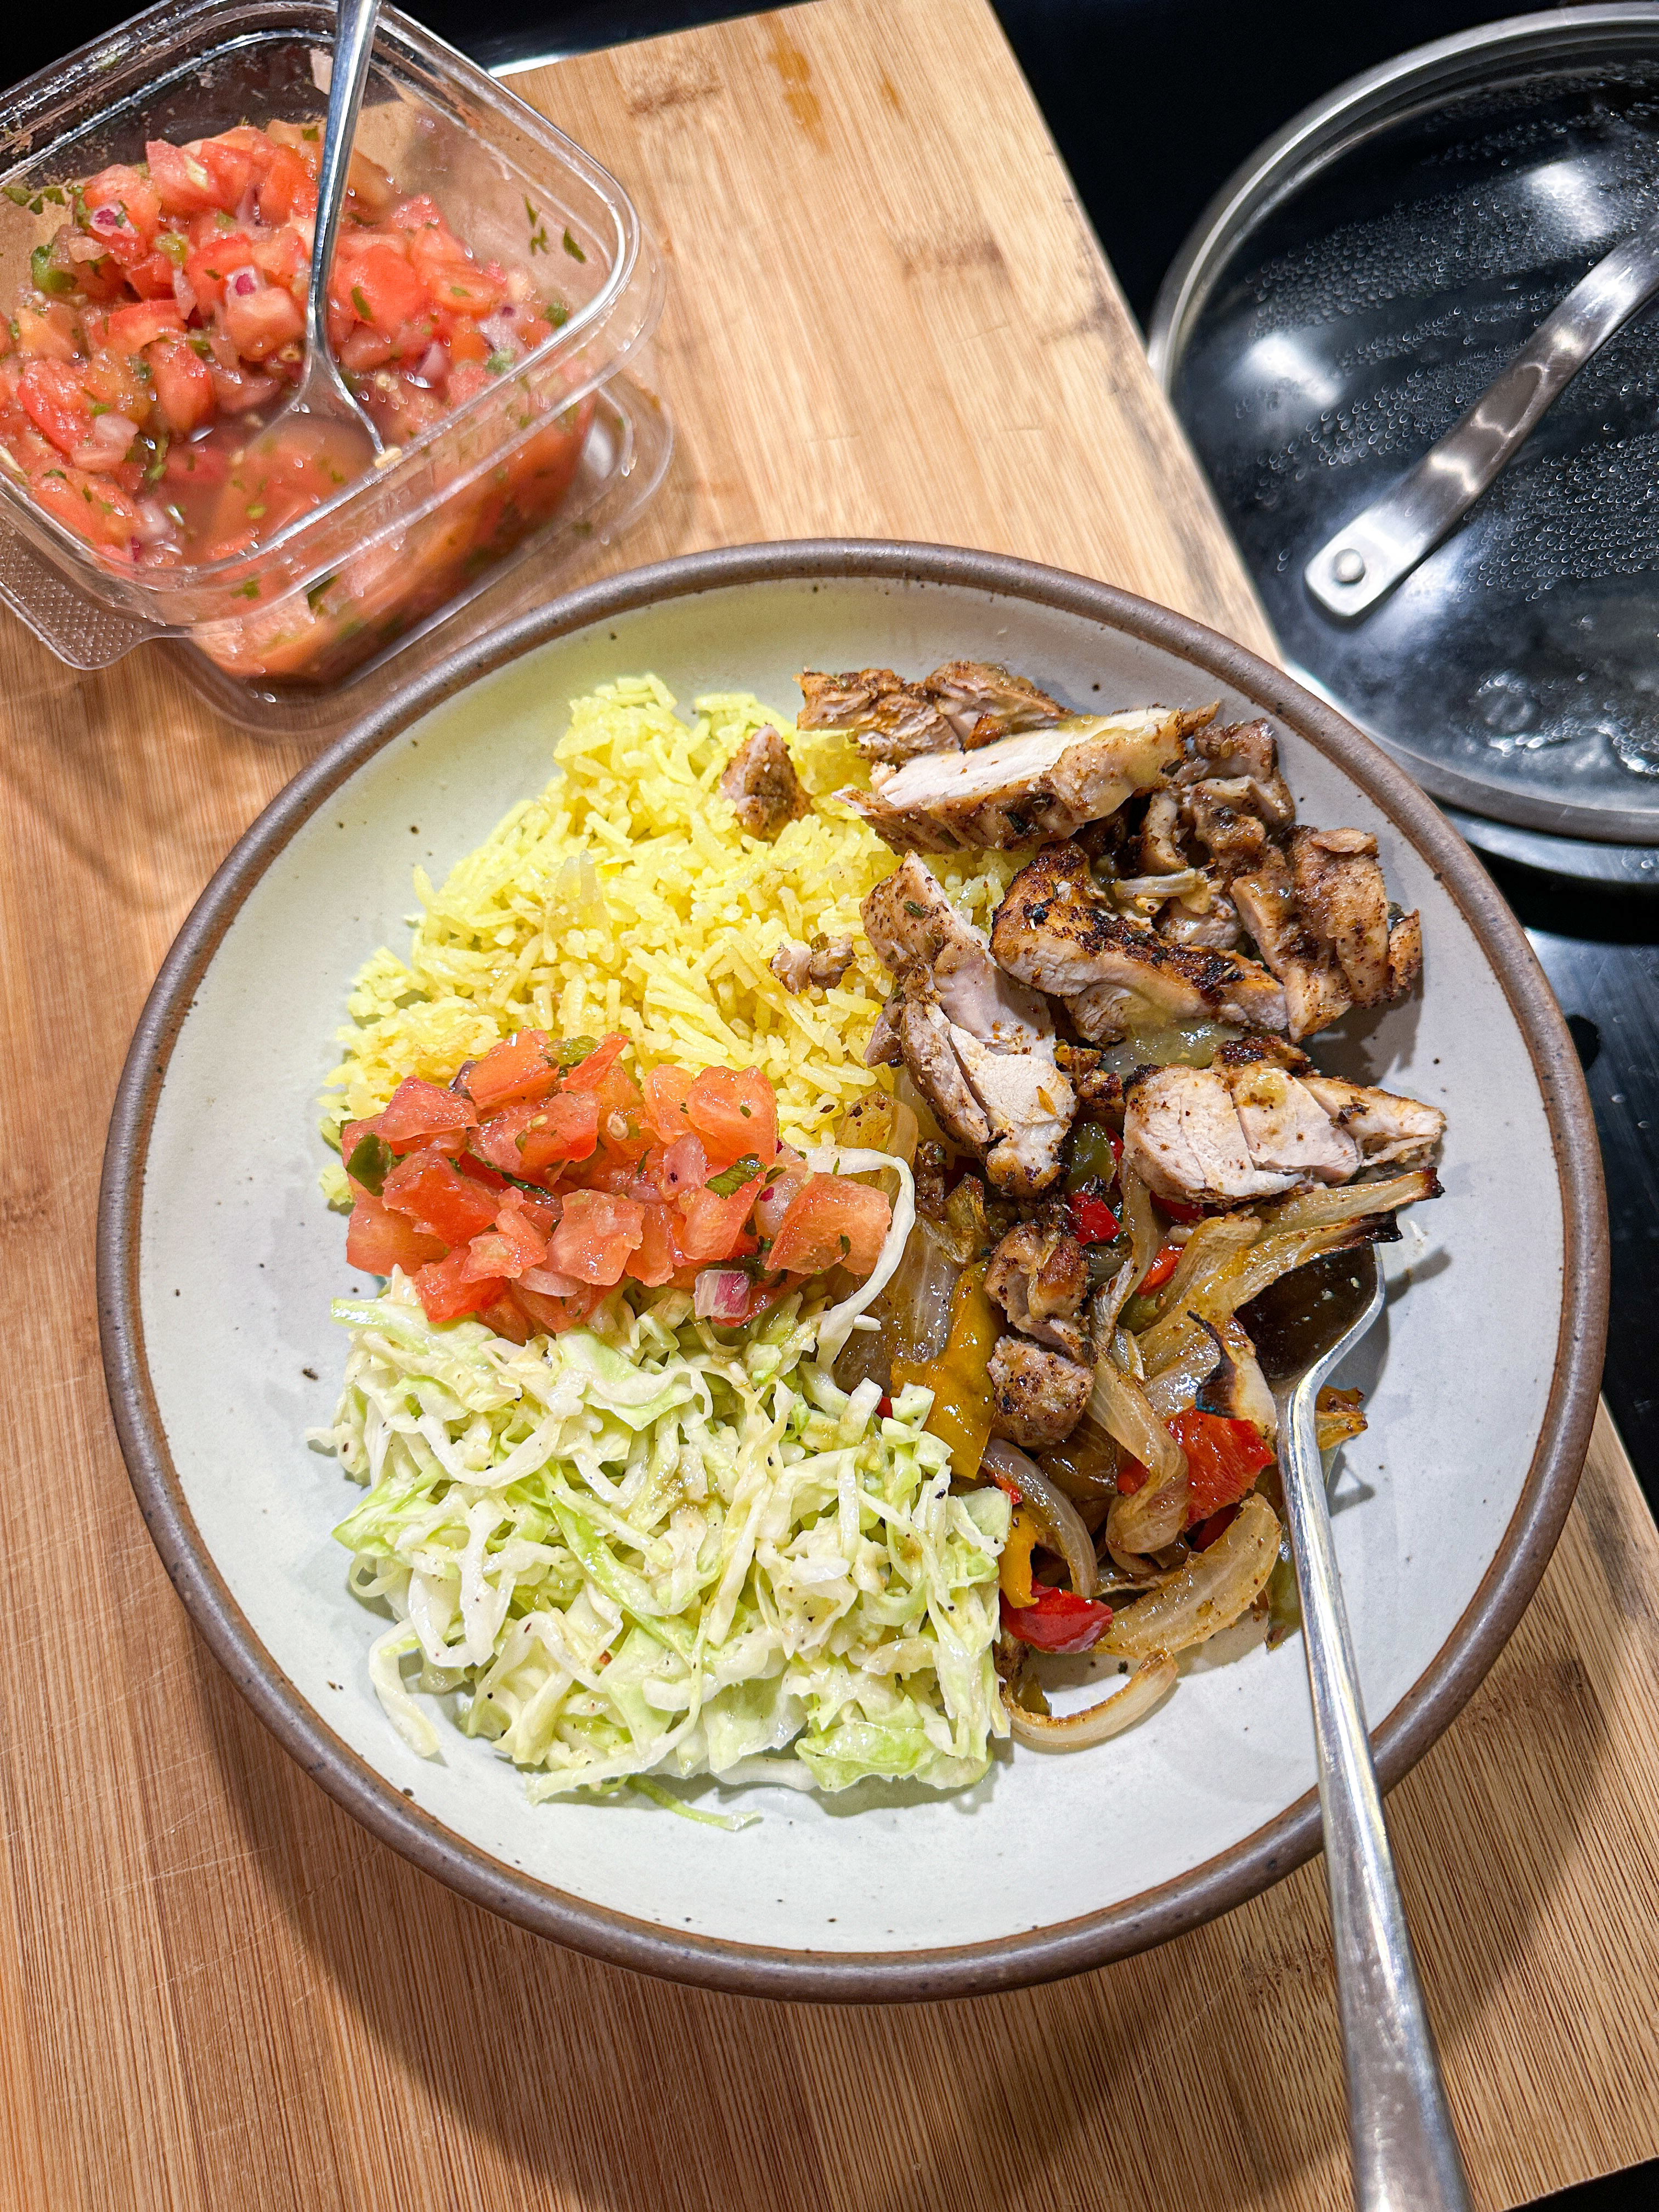 A plate of food with rice, grilled chicken, sautéed vegetables, shredded lettuce, and diced tomatoes next to a container of salsa